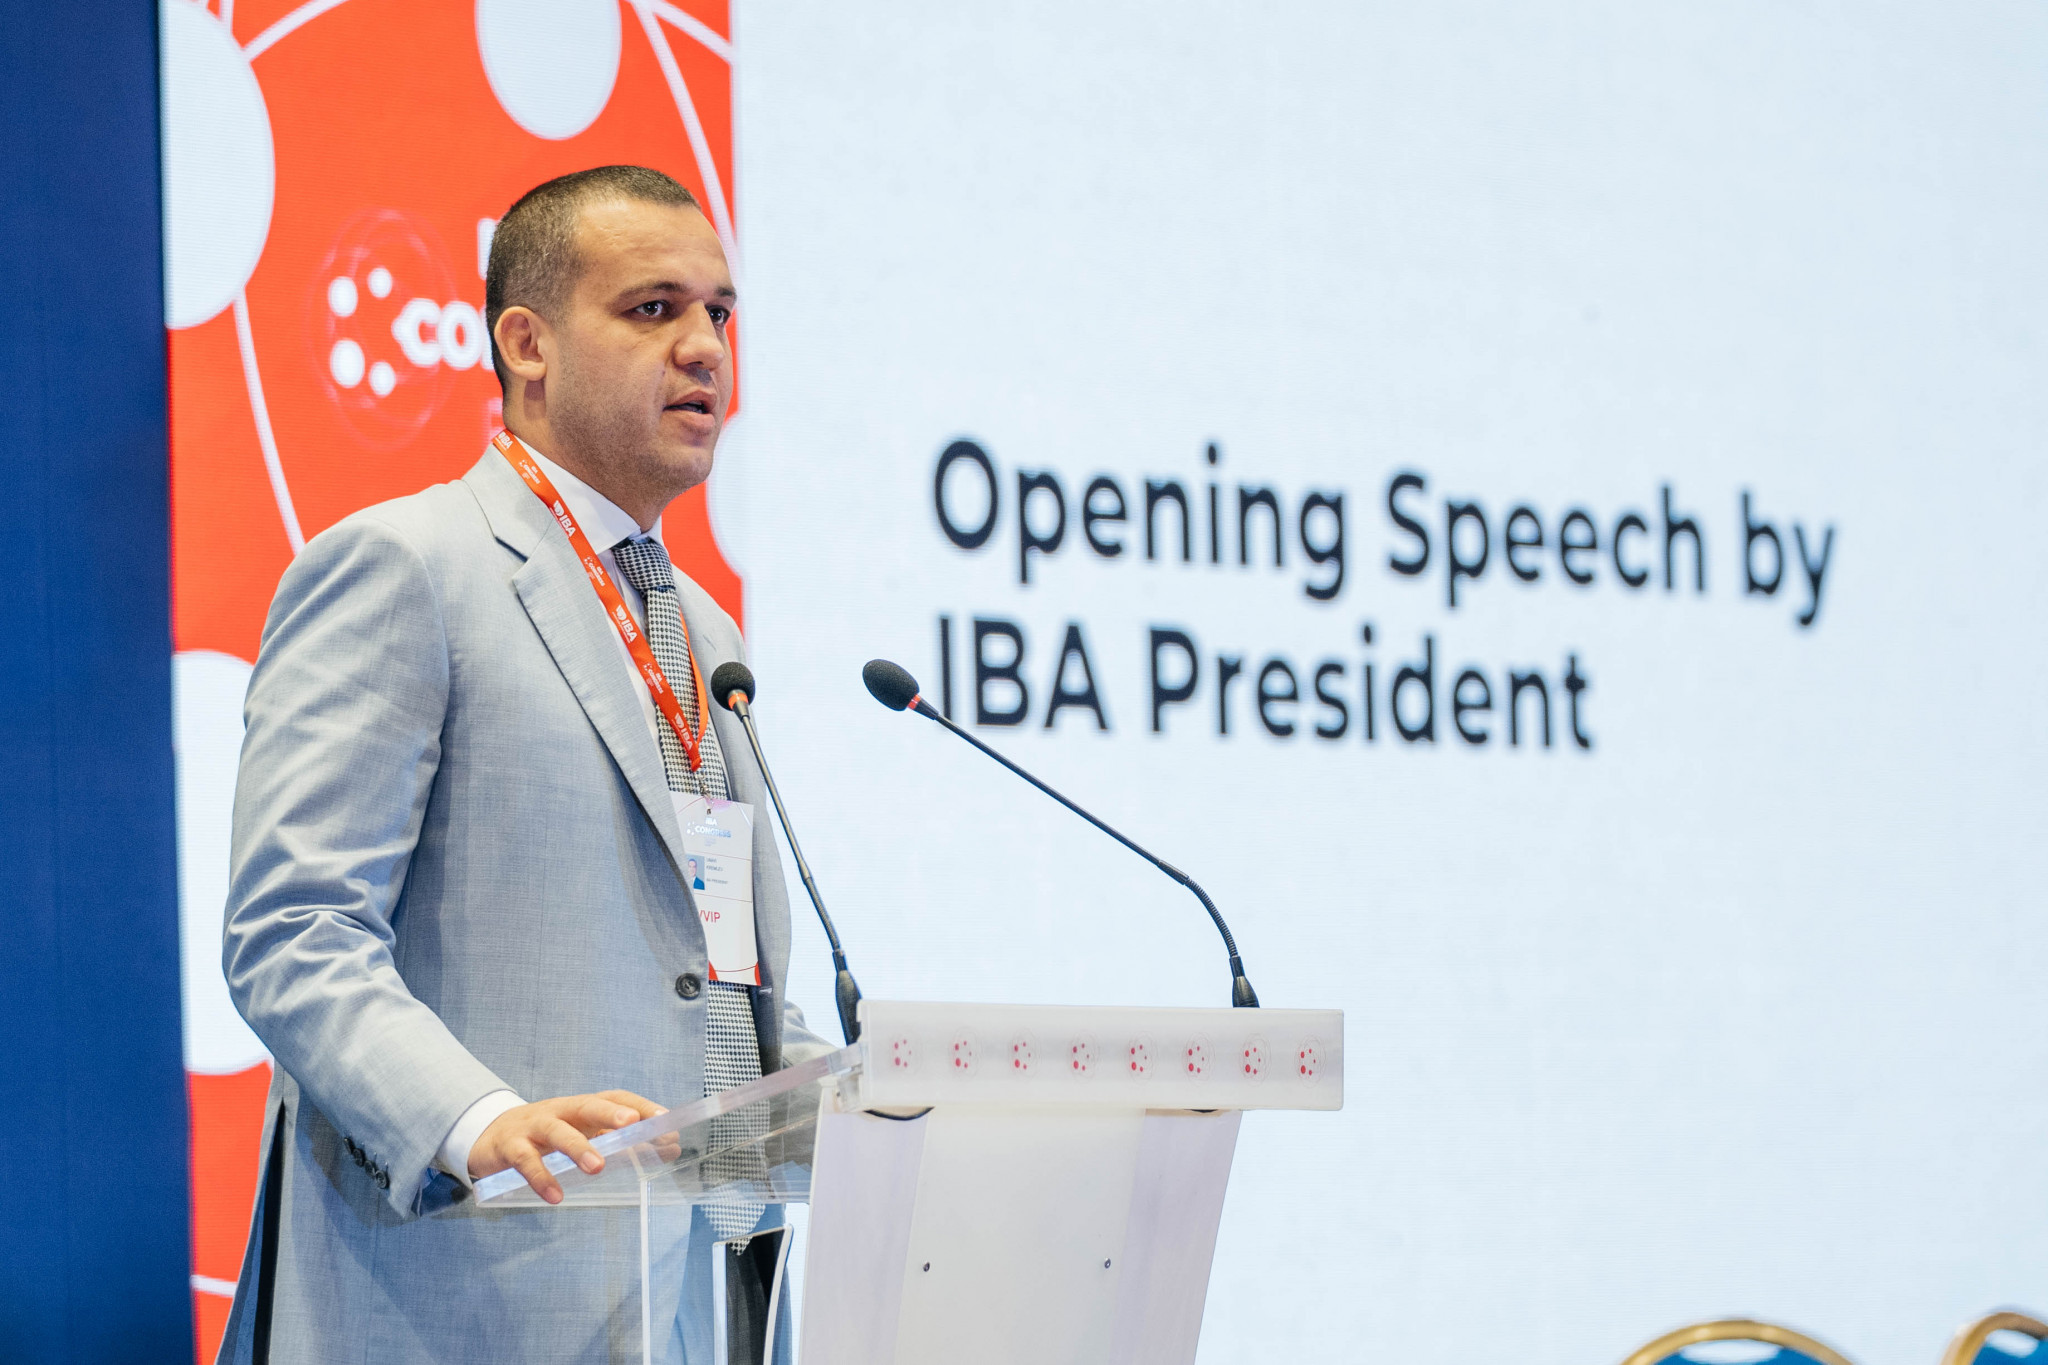 IBA President Umar Kremlev today vowed to let Russians participate under the country's flag and anthem soon ©IBA